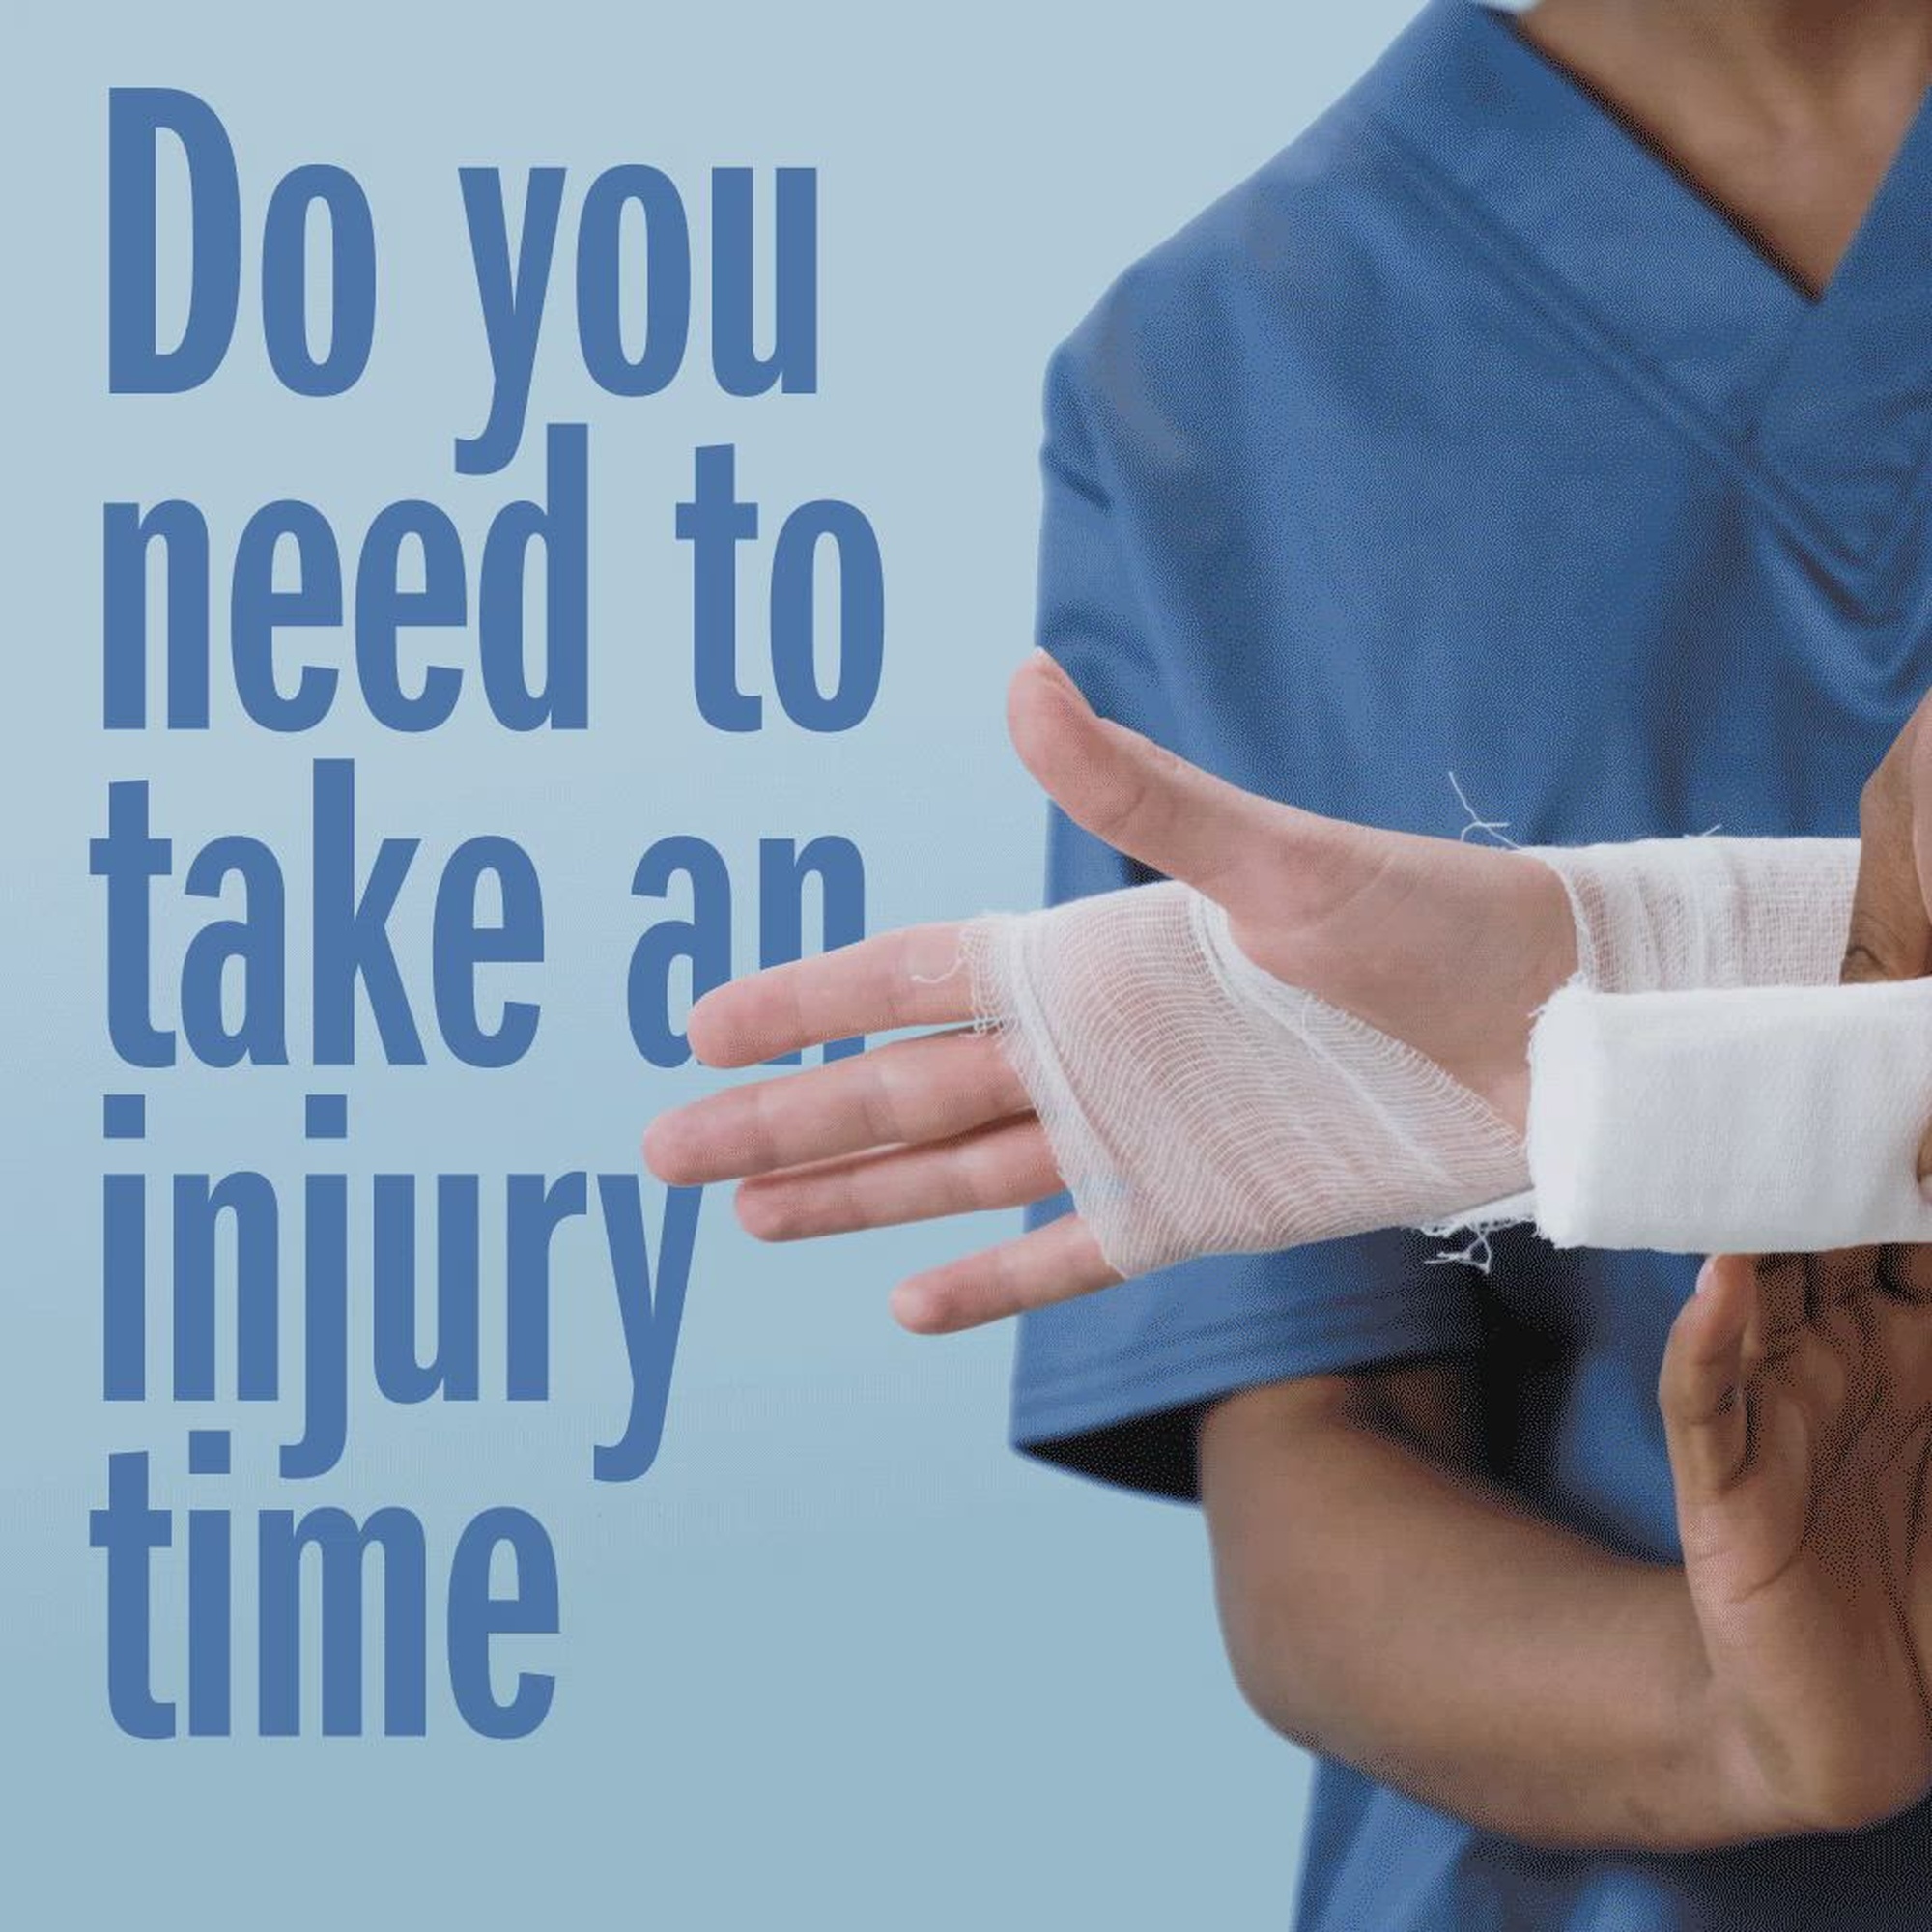 Do you need to take an injury timeout? Dial 1-800-TRICARE for the MHS Nurse Advice Line to speak with a nurse or visit www.mhsnurseadviceline.com to chat with a nurse and game plan for the unexpected.